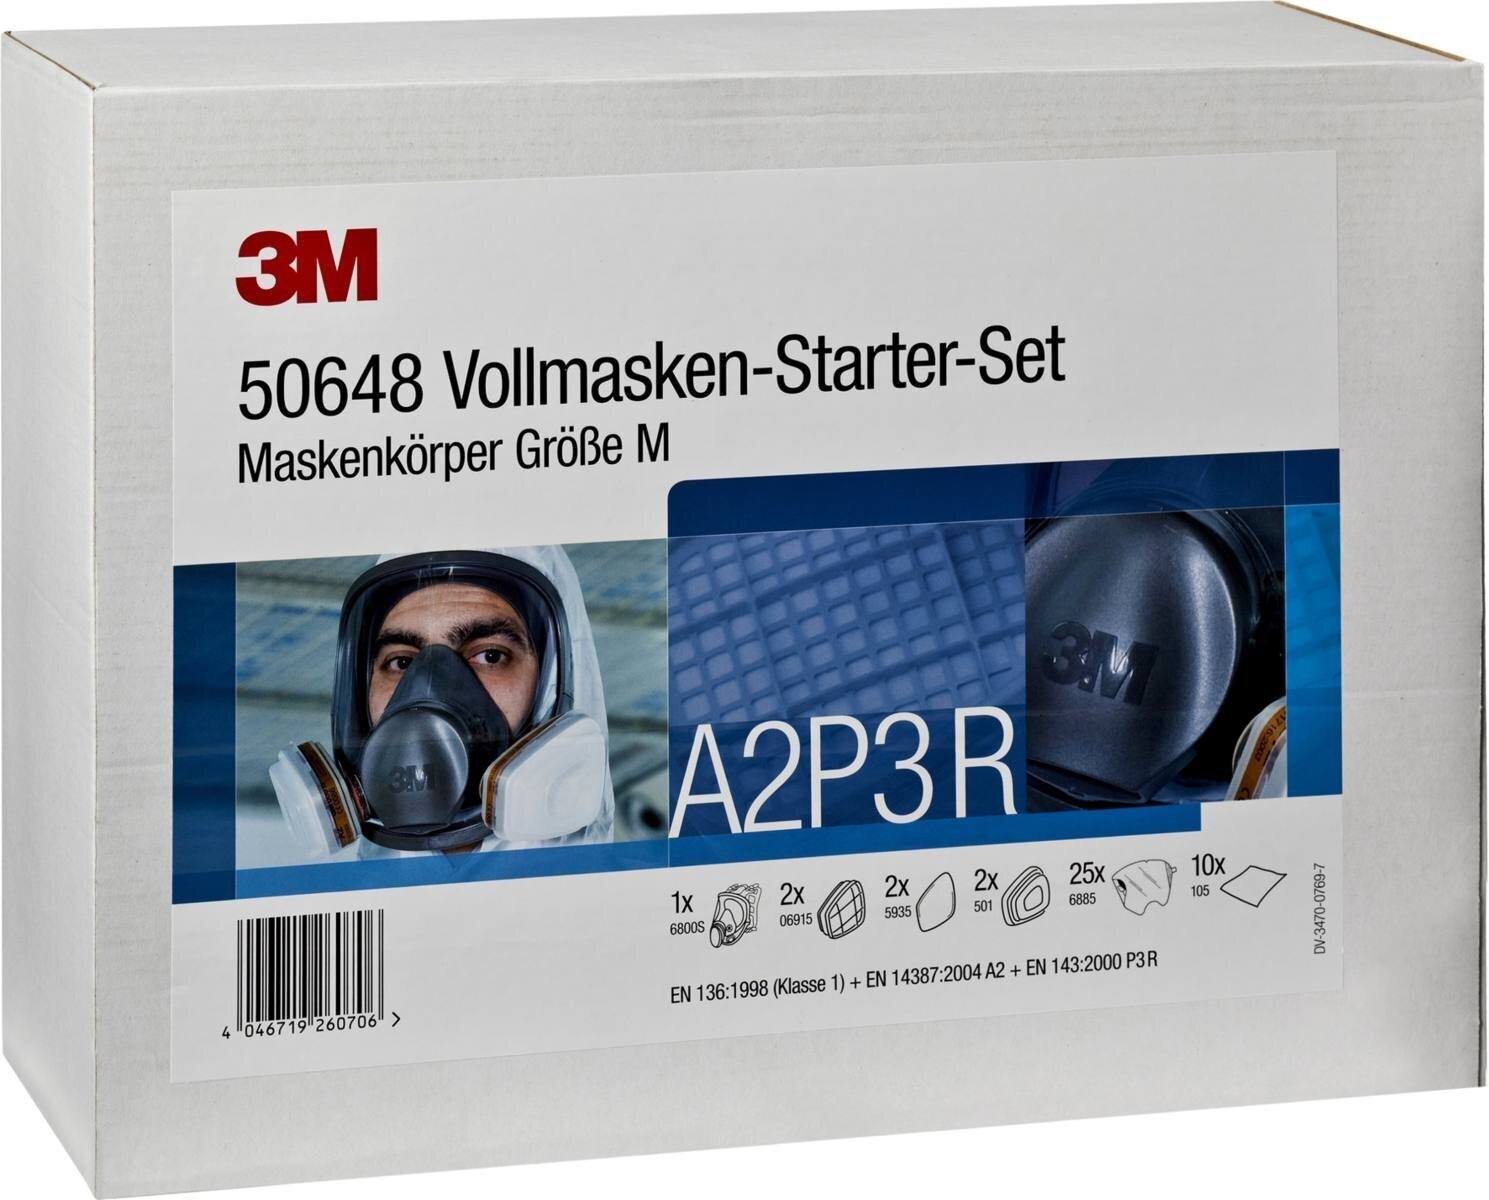 3M 50649 Full face mask starter set, 1x full face mask body 6900 size L, 2x gas/vapor filter 06915 A2*, 2x particle filter 5935 P3R, 2x filter cover 501, 25x visor protection foil 6885, 10x cleaning cloths 105, * corresponds to filter 6055 A2